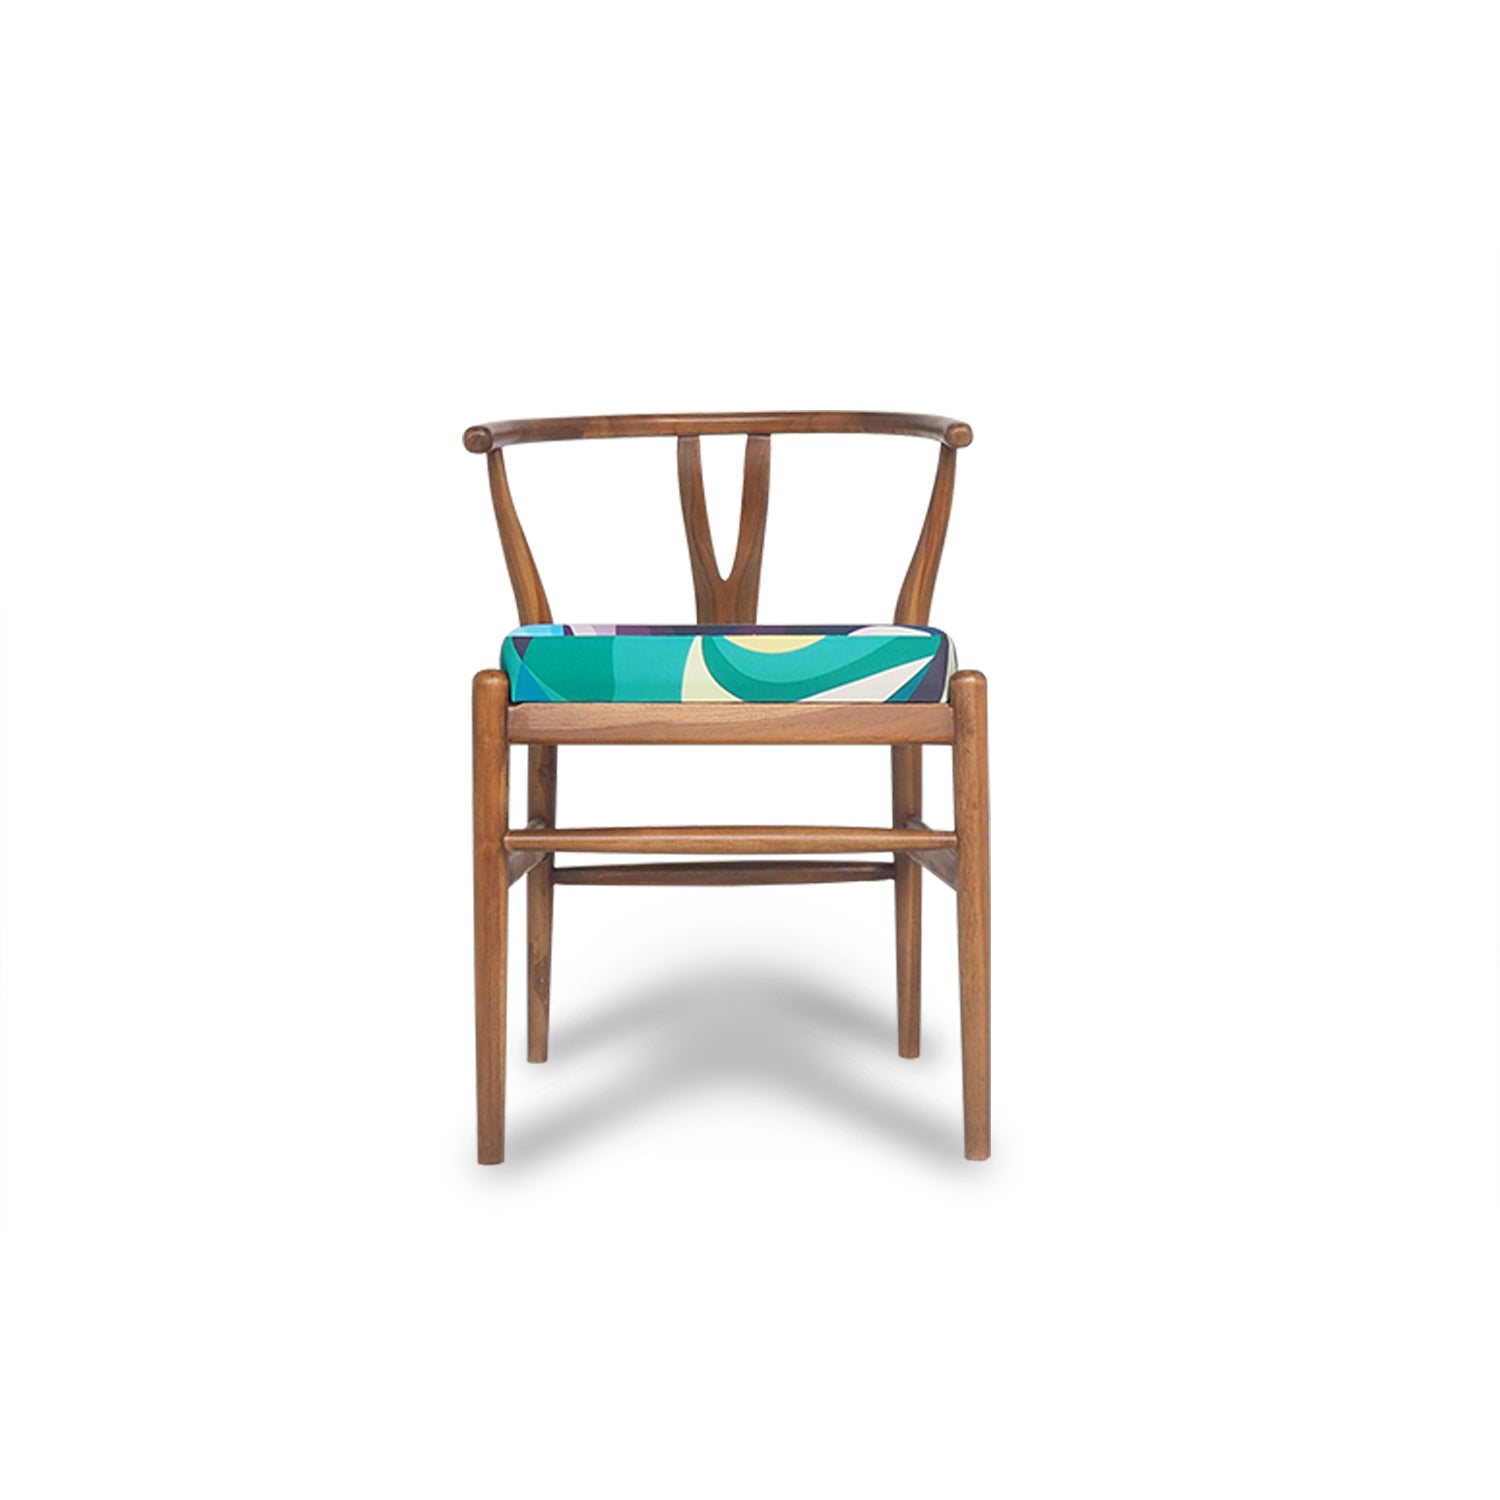 The Green Dining Chair